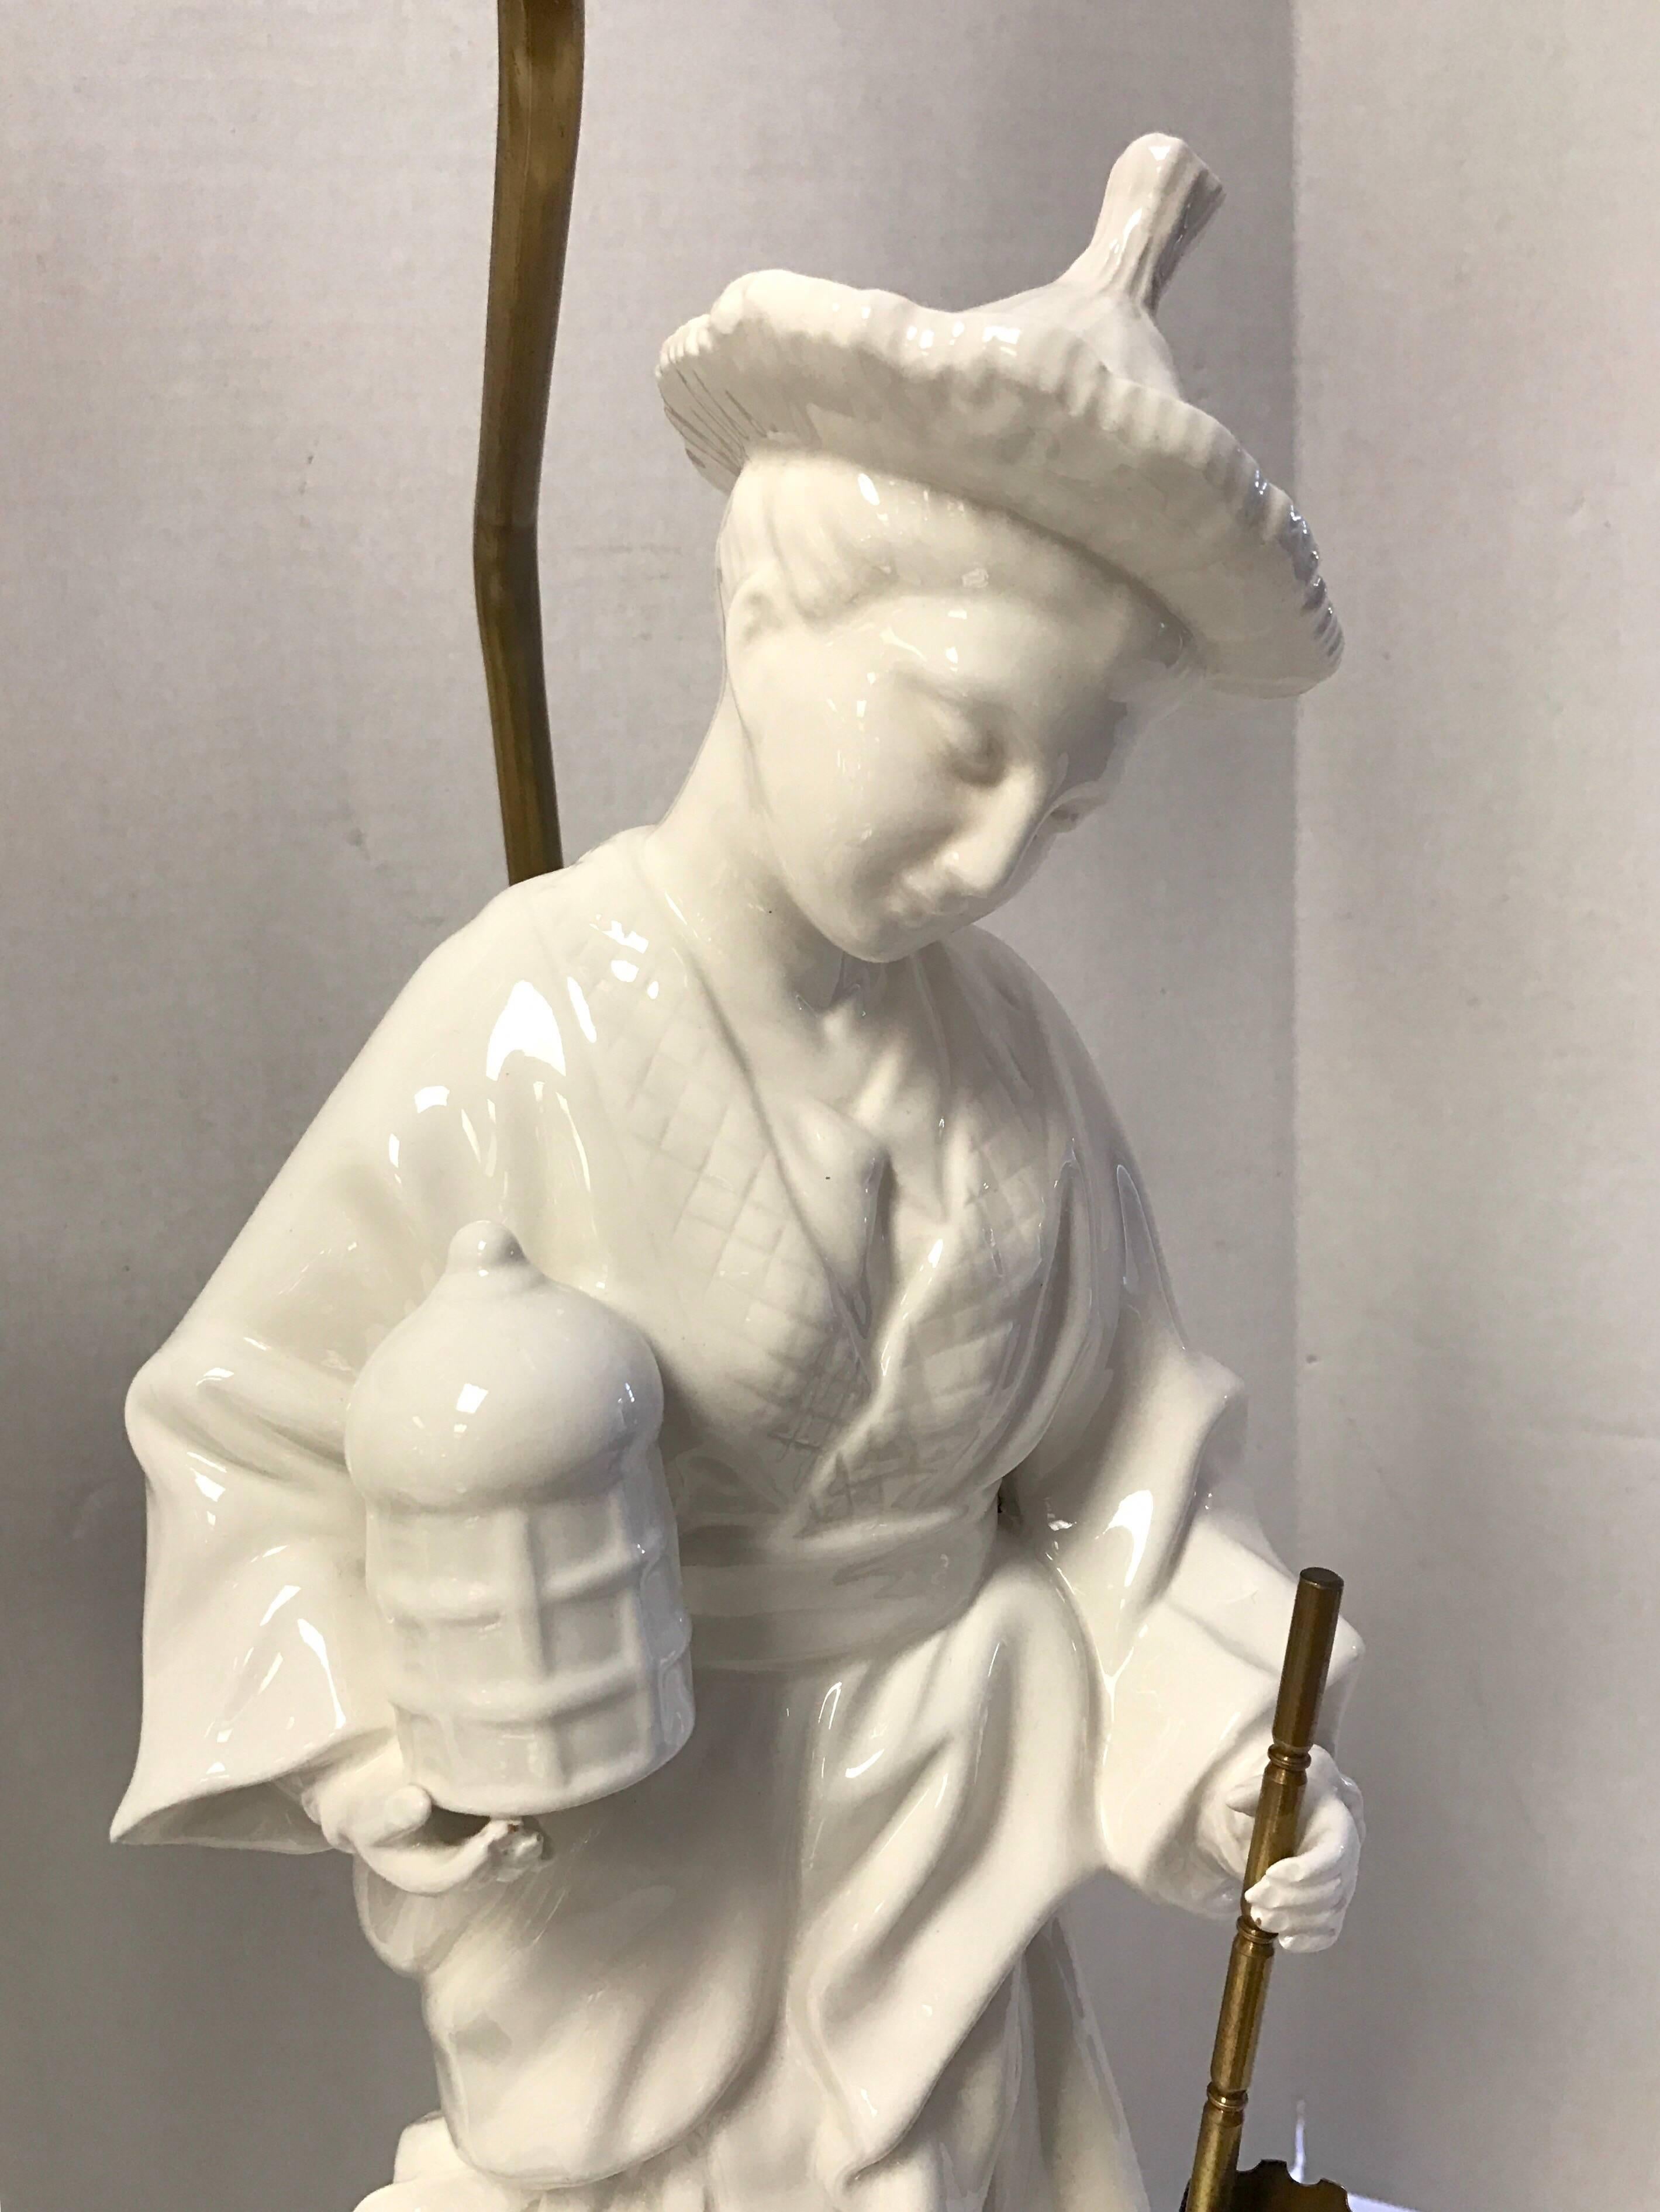 Pair of blanc de chine porcelain figural lamps mounted on wood bases. Male figure holds a brass umbrella. Female figures holds a brass closed umbrella. Lampshade is pleated paper and is included. Overall height 33 inches; 16 inches to top of socket.